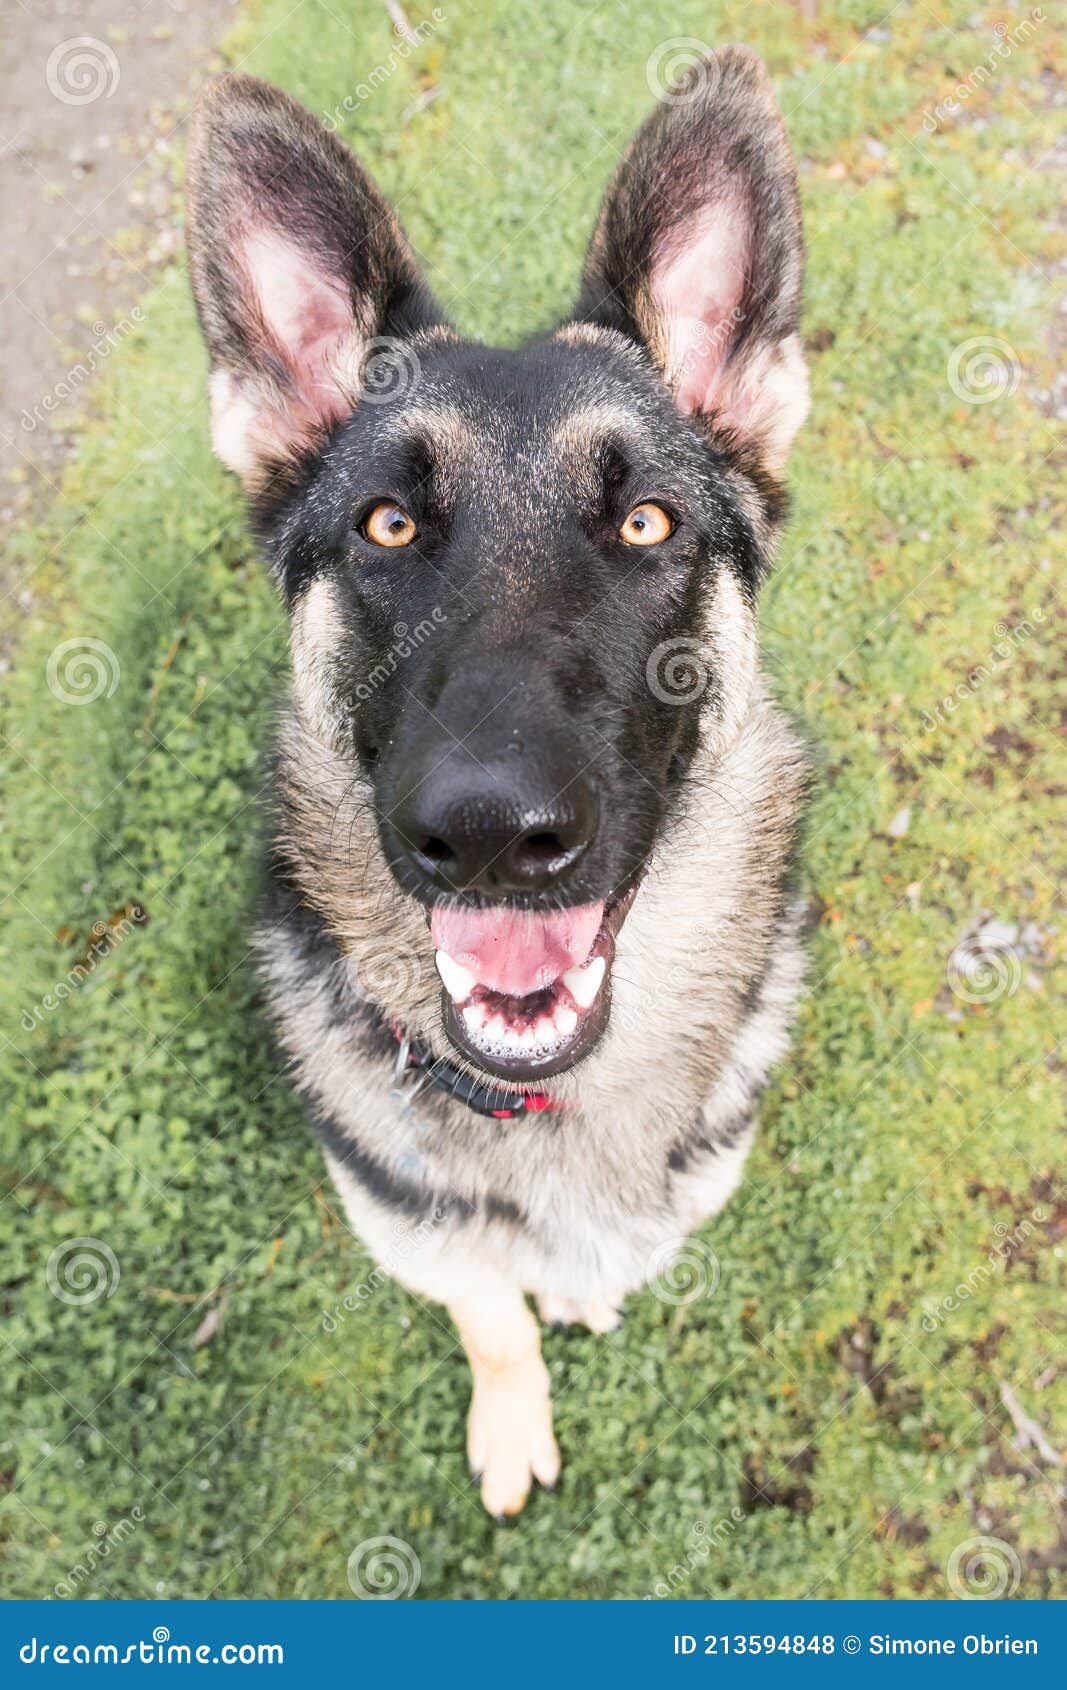 Top View Of German Shepherd Dog Face With Open Mouth Displaying Tongue